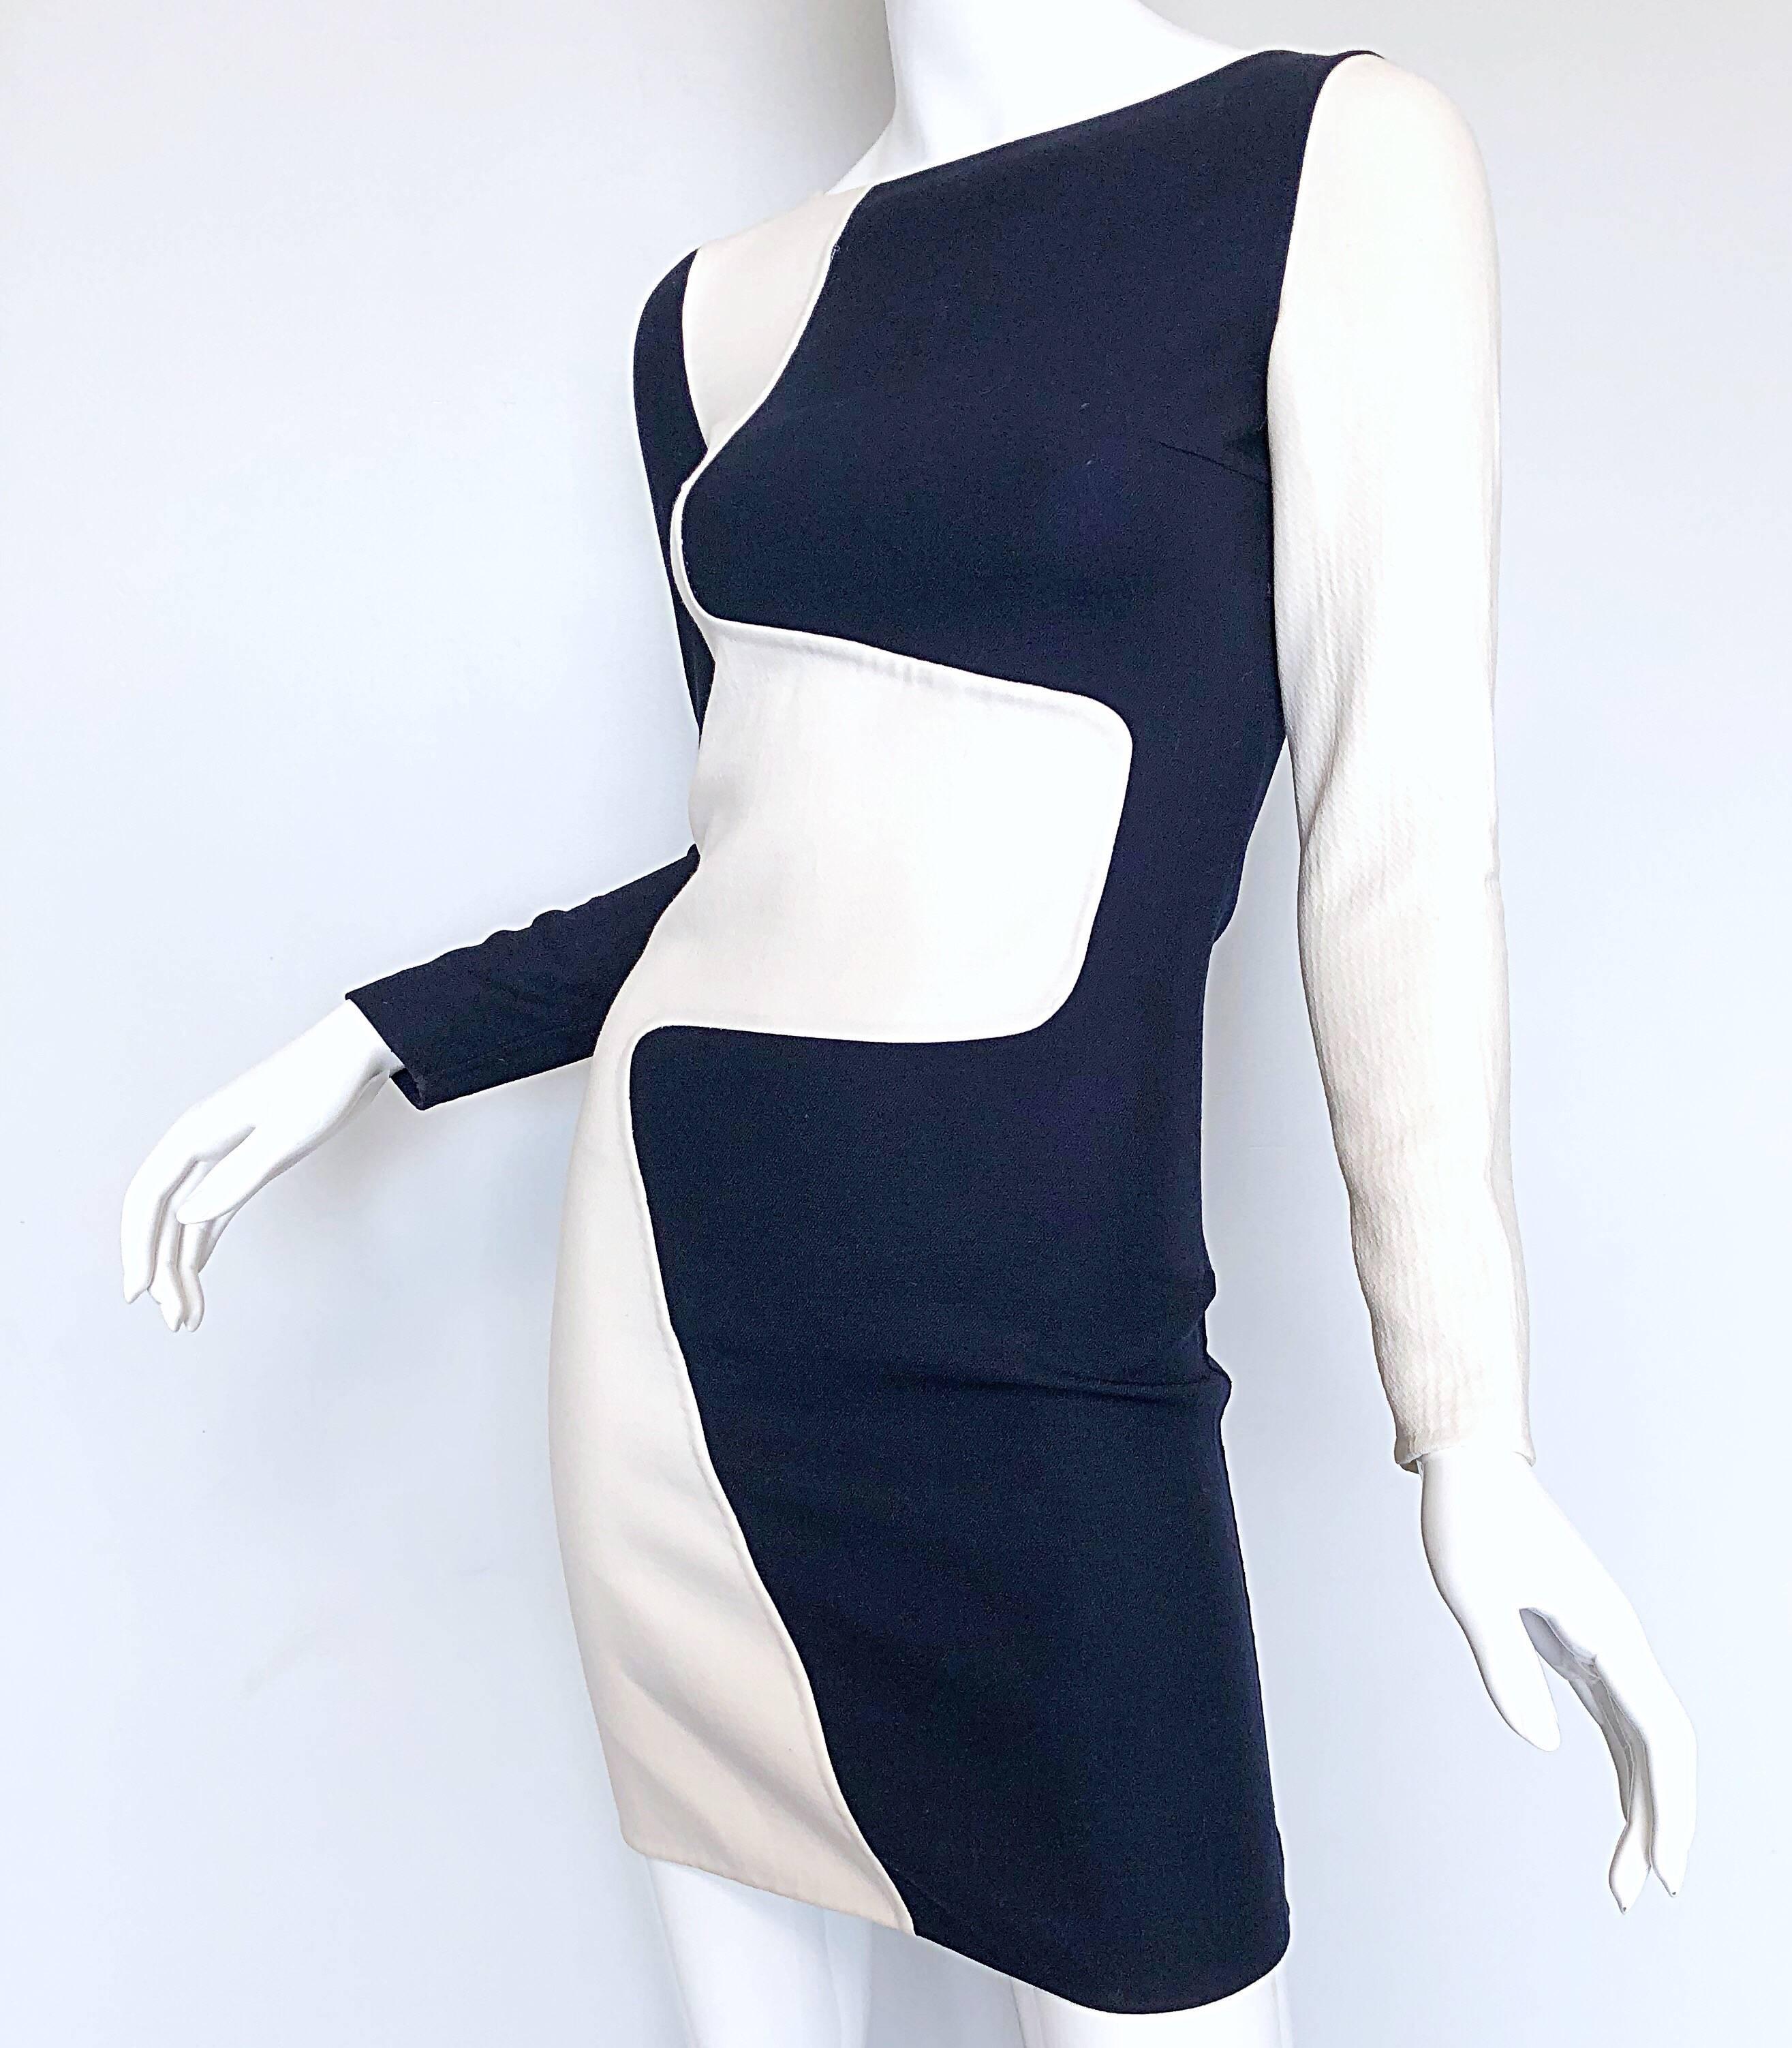 Michael Kors Collection Spring 2013 Size 0 / 2 Navy Blue and White Puzzle Dress In Excellent Condition For Sale In San Diego, CA